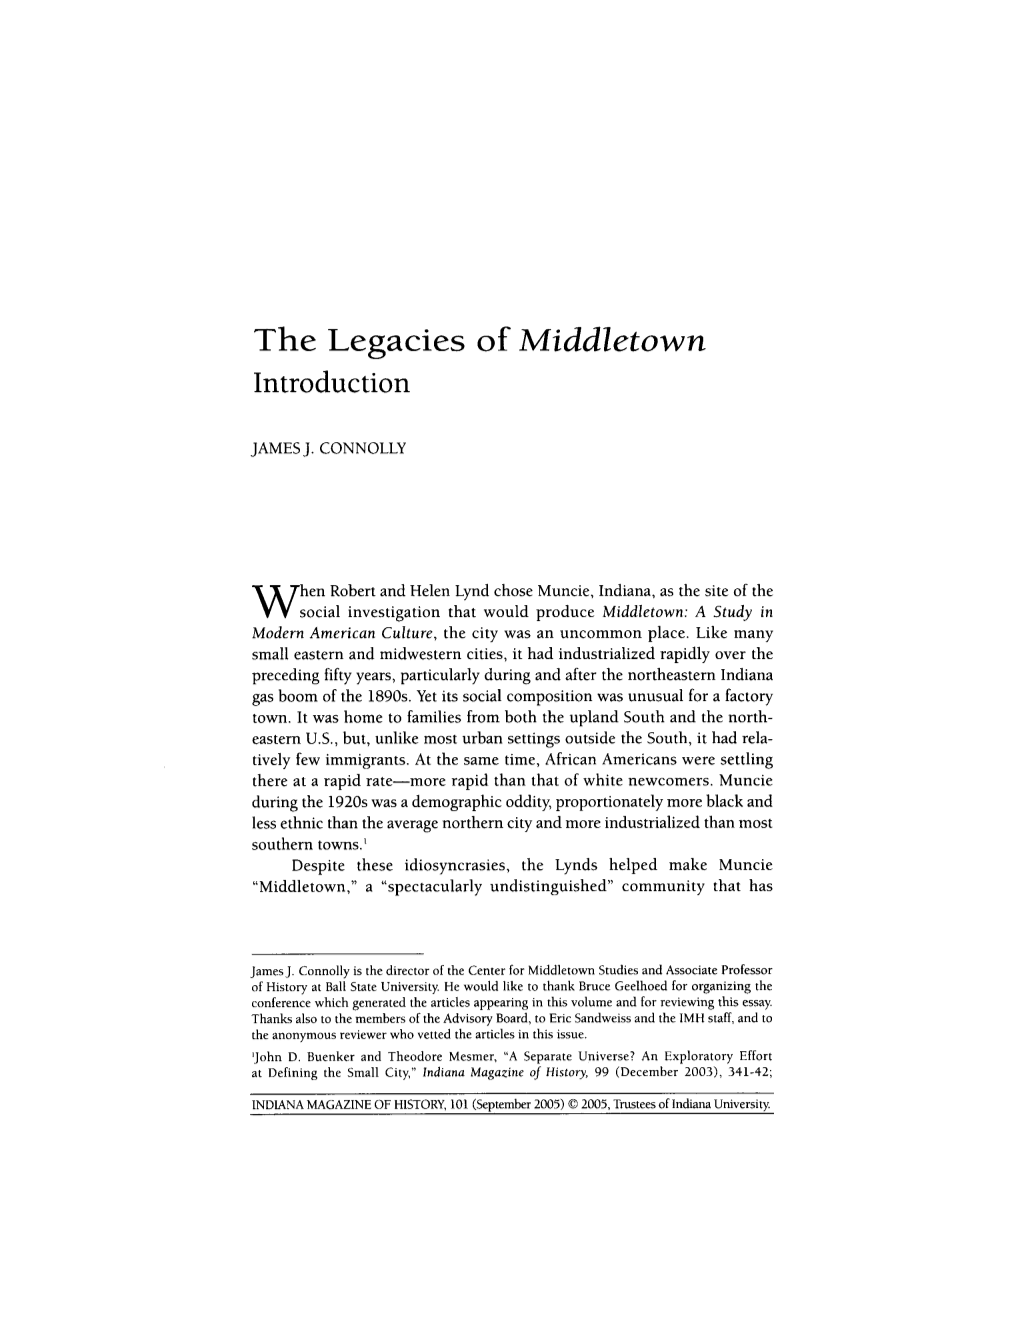 The Legacies of Middletown Introduction